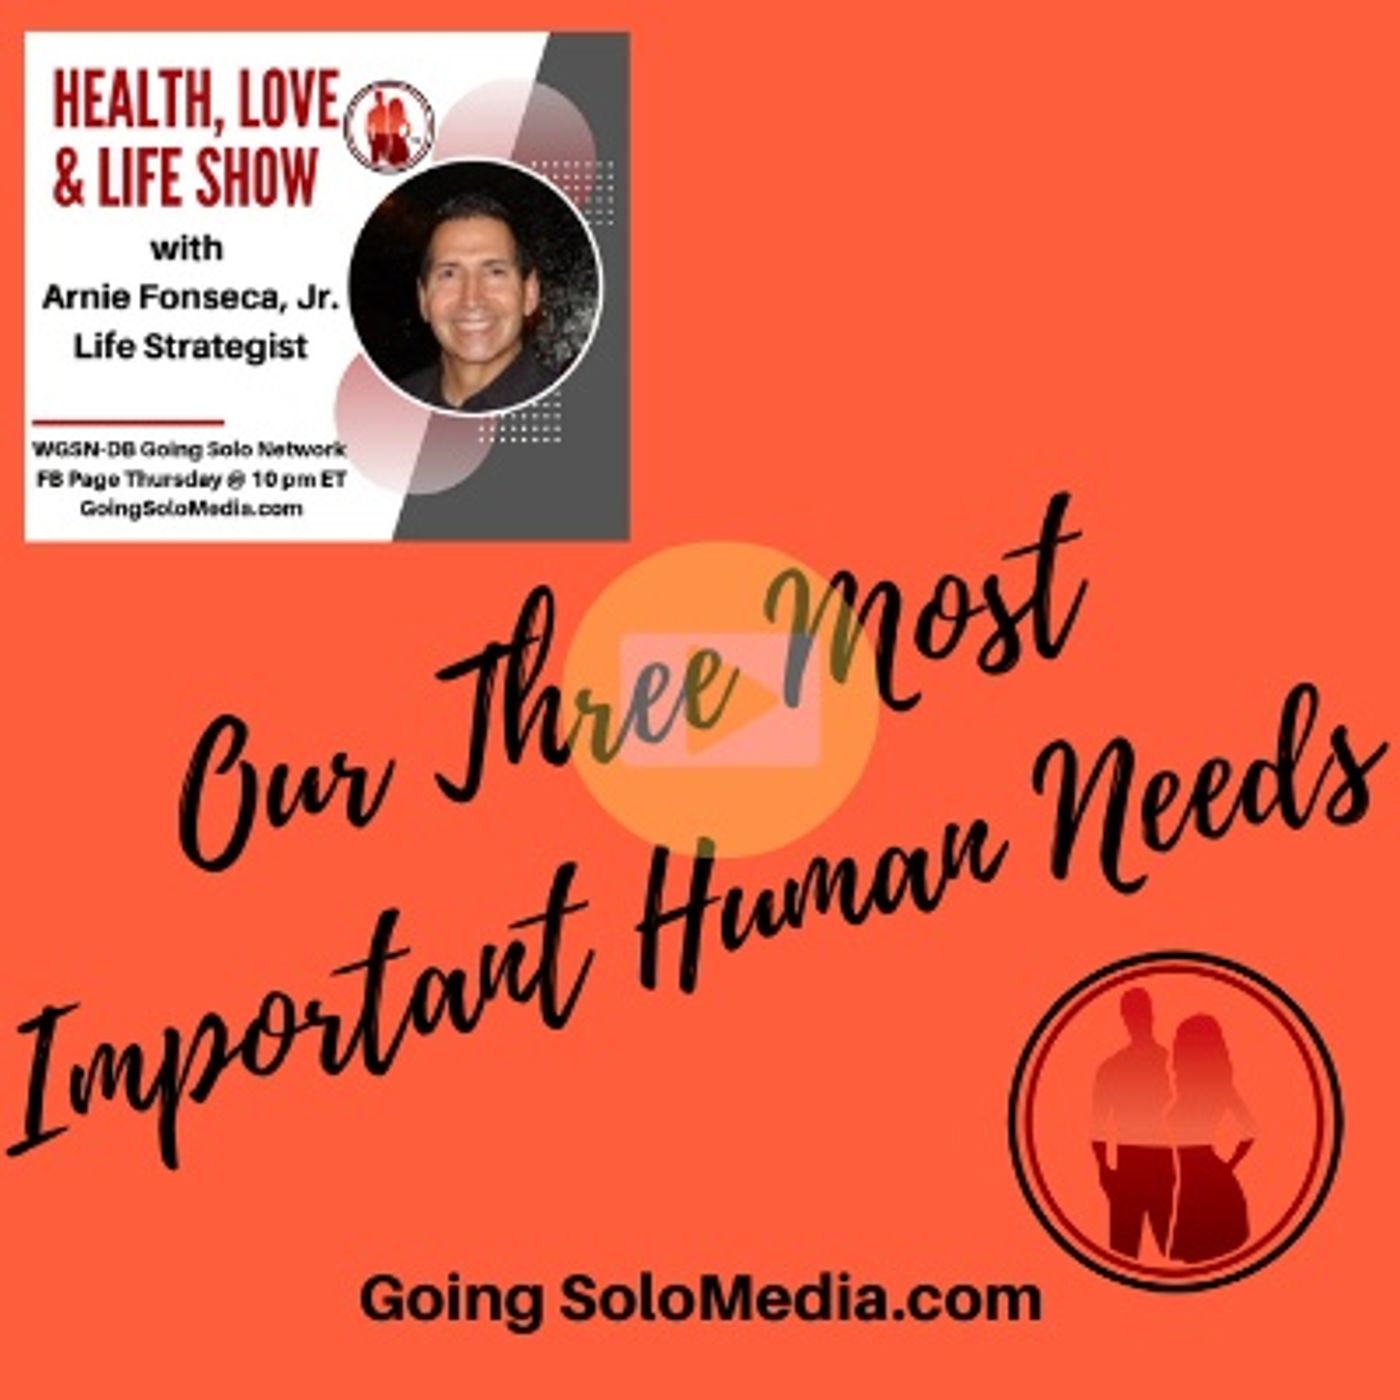 Our Three Most Important Human Needs